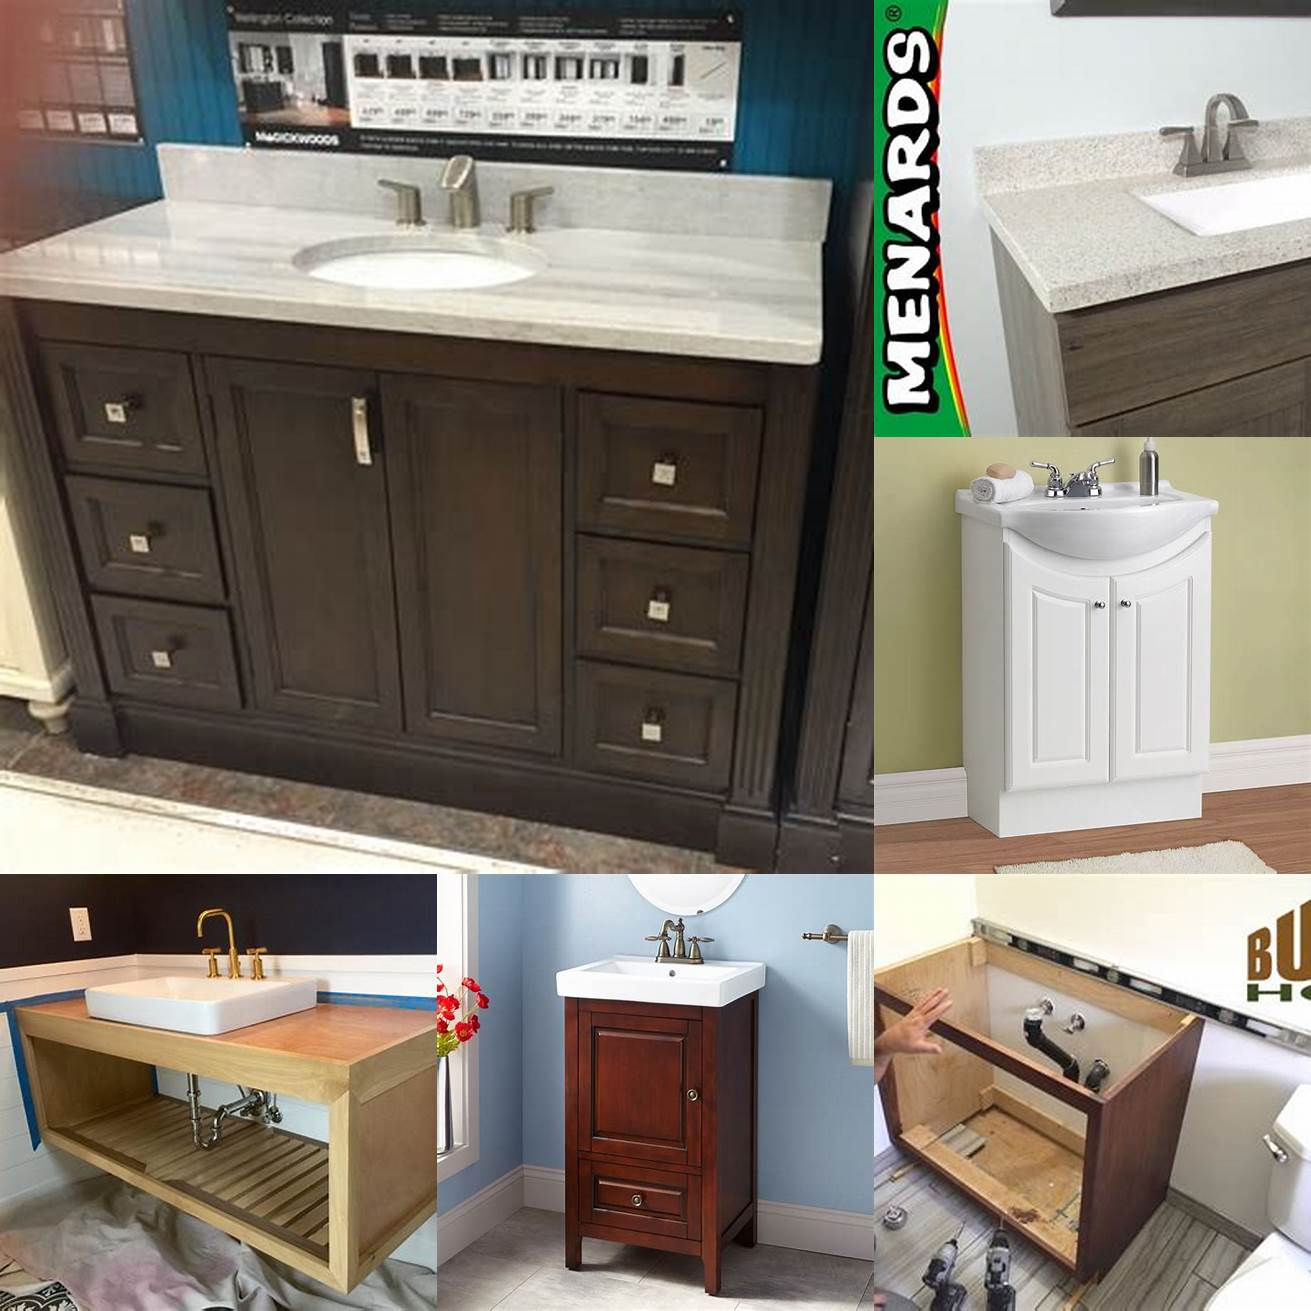 Easy installation Menards vanities are easy to install even if you are not a DIY expert The product comes with clear instructions and all the necessary hardware for installation